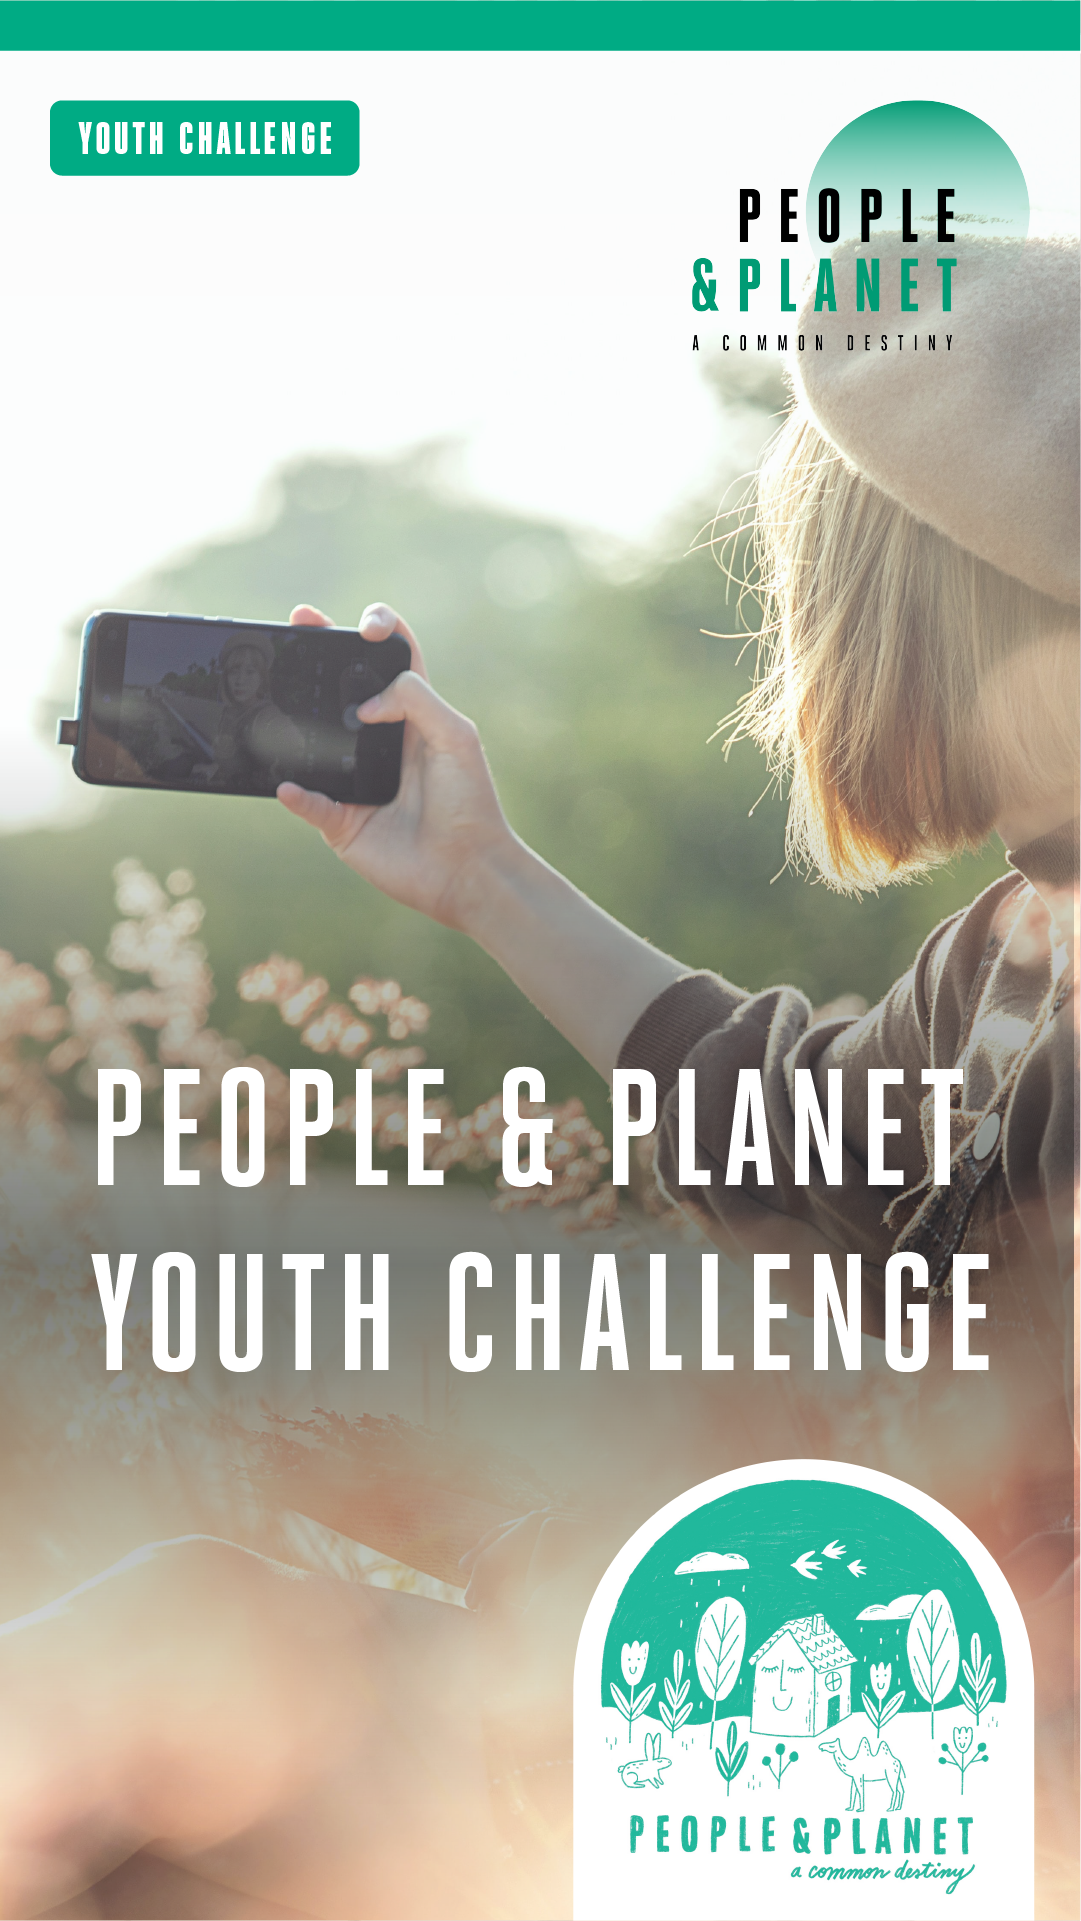 Youth Challenge - what are you doing for a globally sustainable development world?